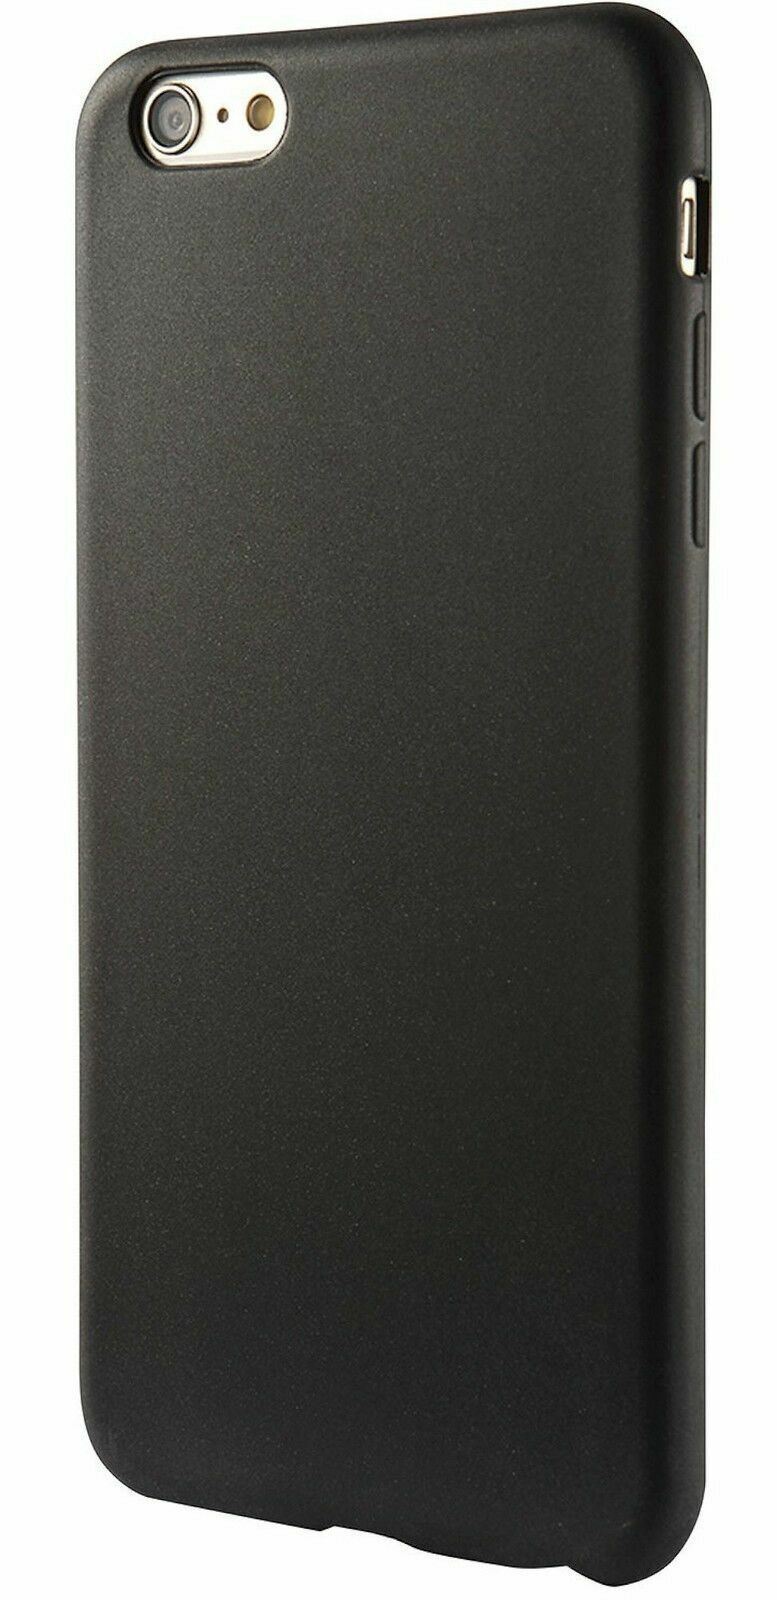 NEW Insignia Apple iPhone 6+ 6S PLUS Soft BLACK Cell Phone Case Grip NS-MA65STB - $5.59